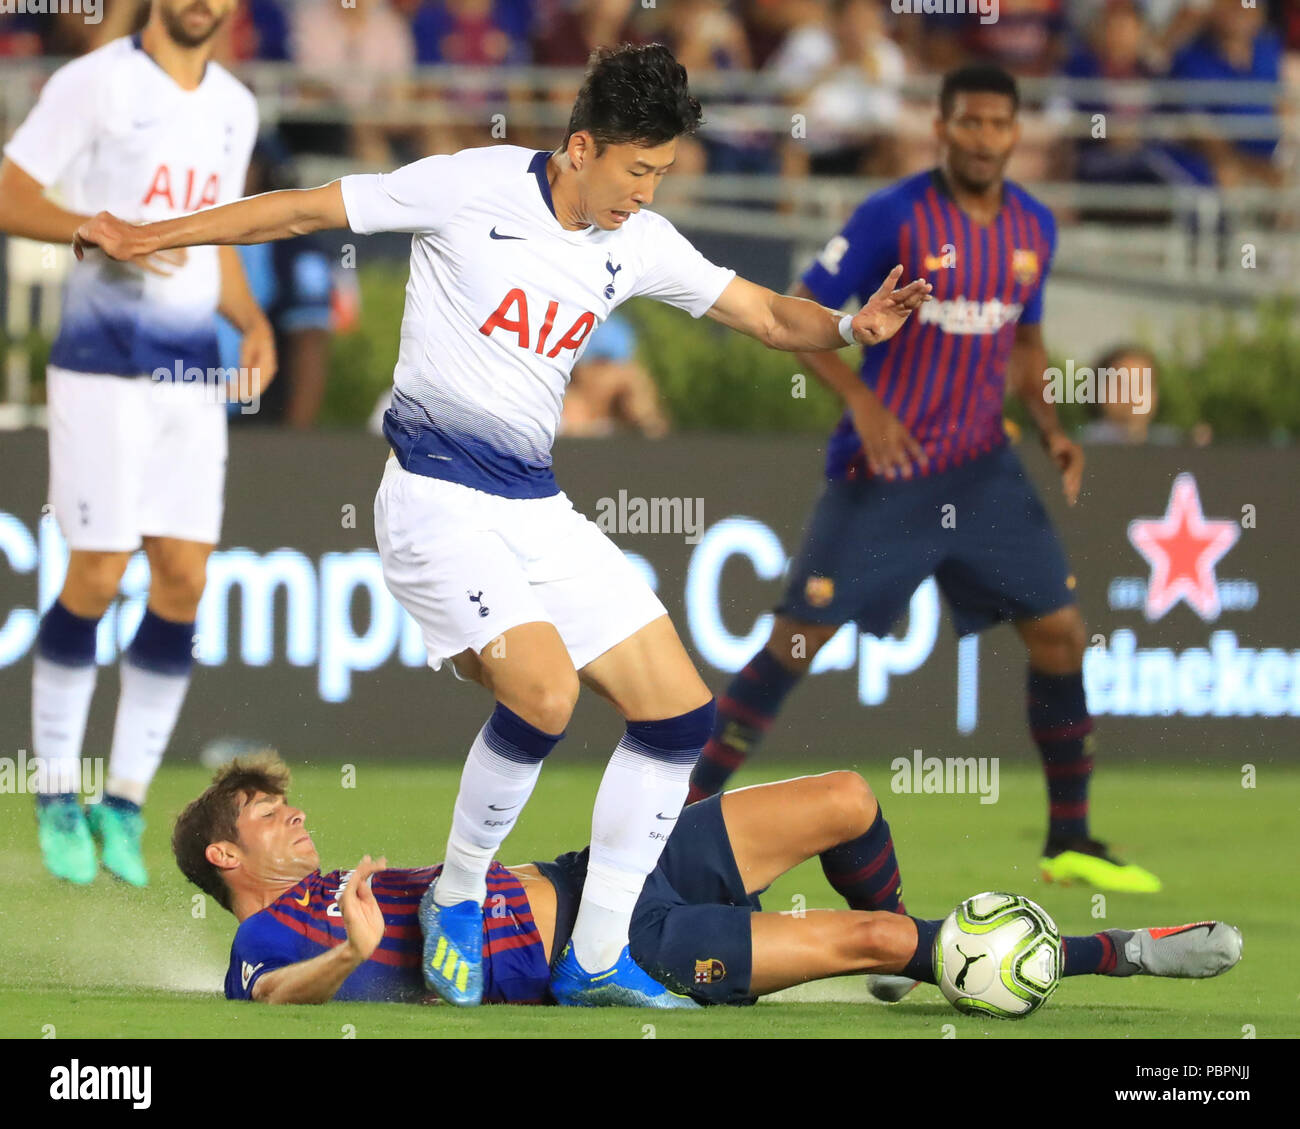 Pasadena, USA. 28th July, 2018. Hotspur's Son Heung-Min (Top) competes during the International Champions Cup soccer match between Barcelona and Tottenham Hotspur in Pasadena, the United States, July 28, 2018. Barcelona won 7-5 (5-3 in penalty shootout). Credit: Li Ying/Xinhua/Alamy Live News Stock Photo